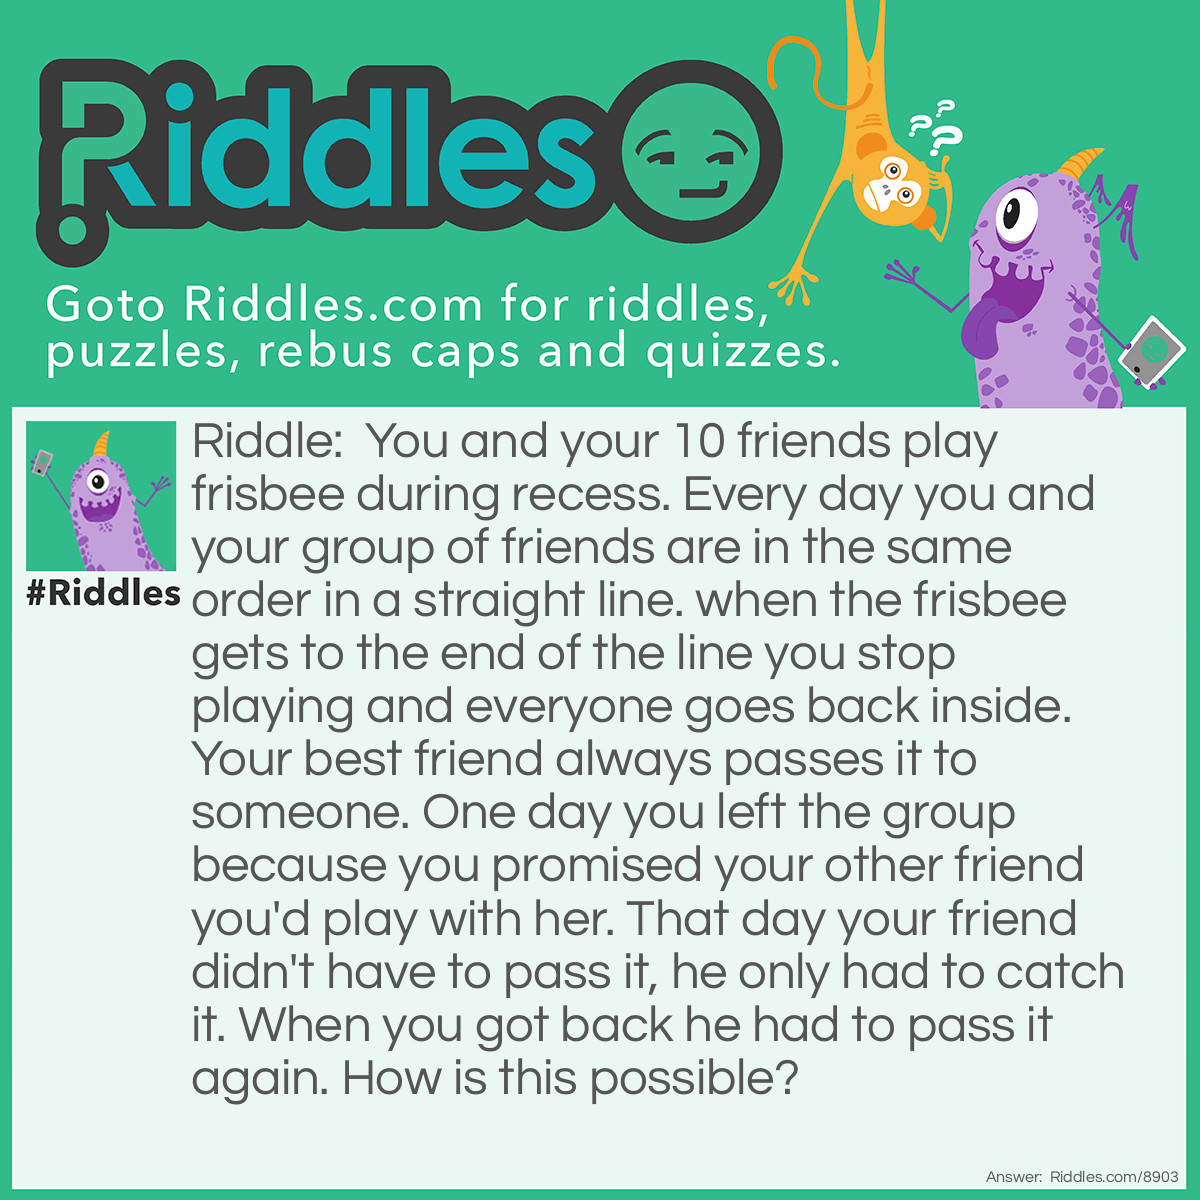 Riddle: You and your 10 friends play frisbee during recess. Every day you and your group of friends are in the same order in a straight line. when the frisbee gets to the end of the line you stop playing and everyone goes back inside. Your best friend always passes it to someone. One day you left the group because you promised your other friend you'd play with her. That day your friend didn't have to pass it, he only had to catch it. When you got back he had to pass it again. How is this possible? Answer: He's 2nd to last in line and you're last.